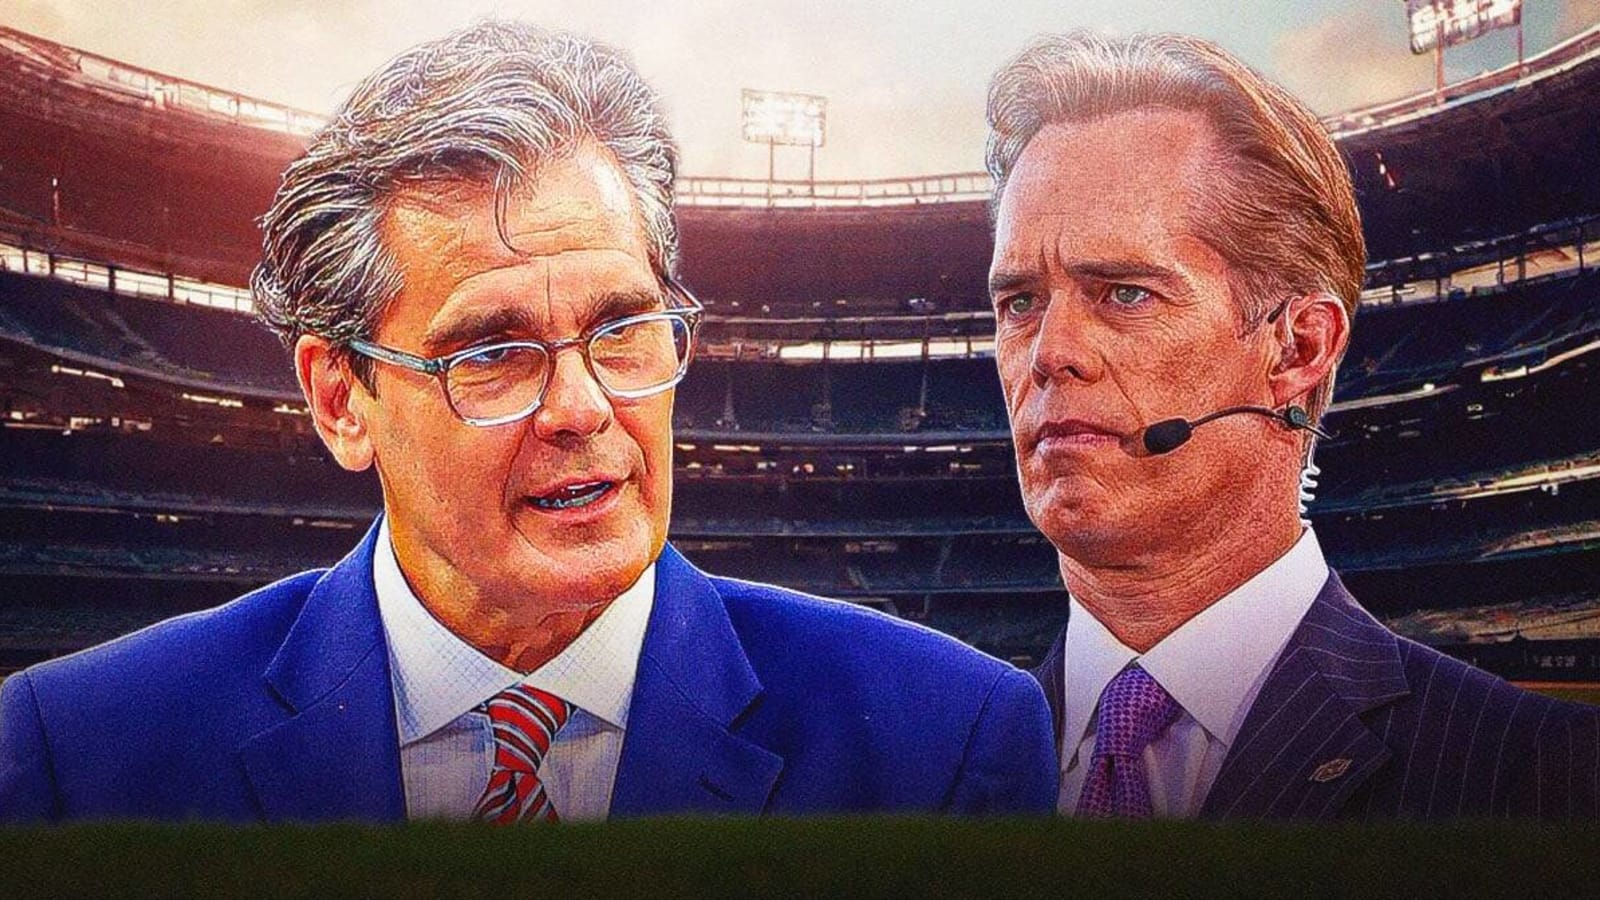 Joe Buck making first MLB broadcast booth appearance since 2021 for Cardinals-Cubs battle